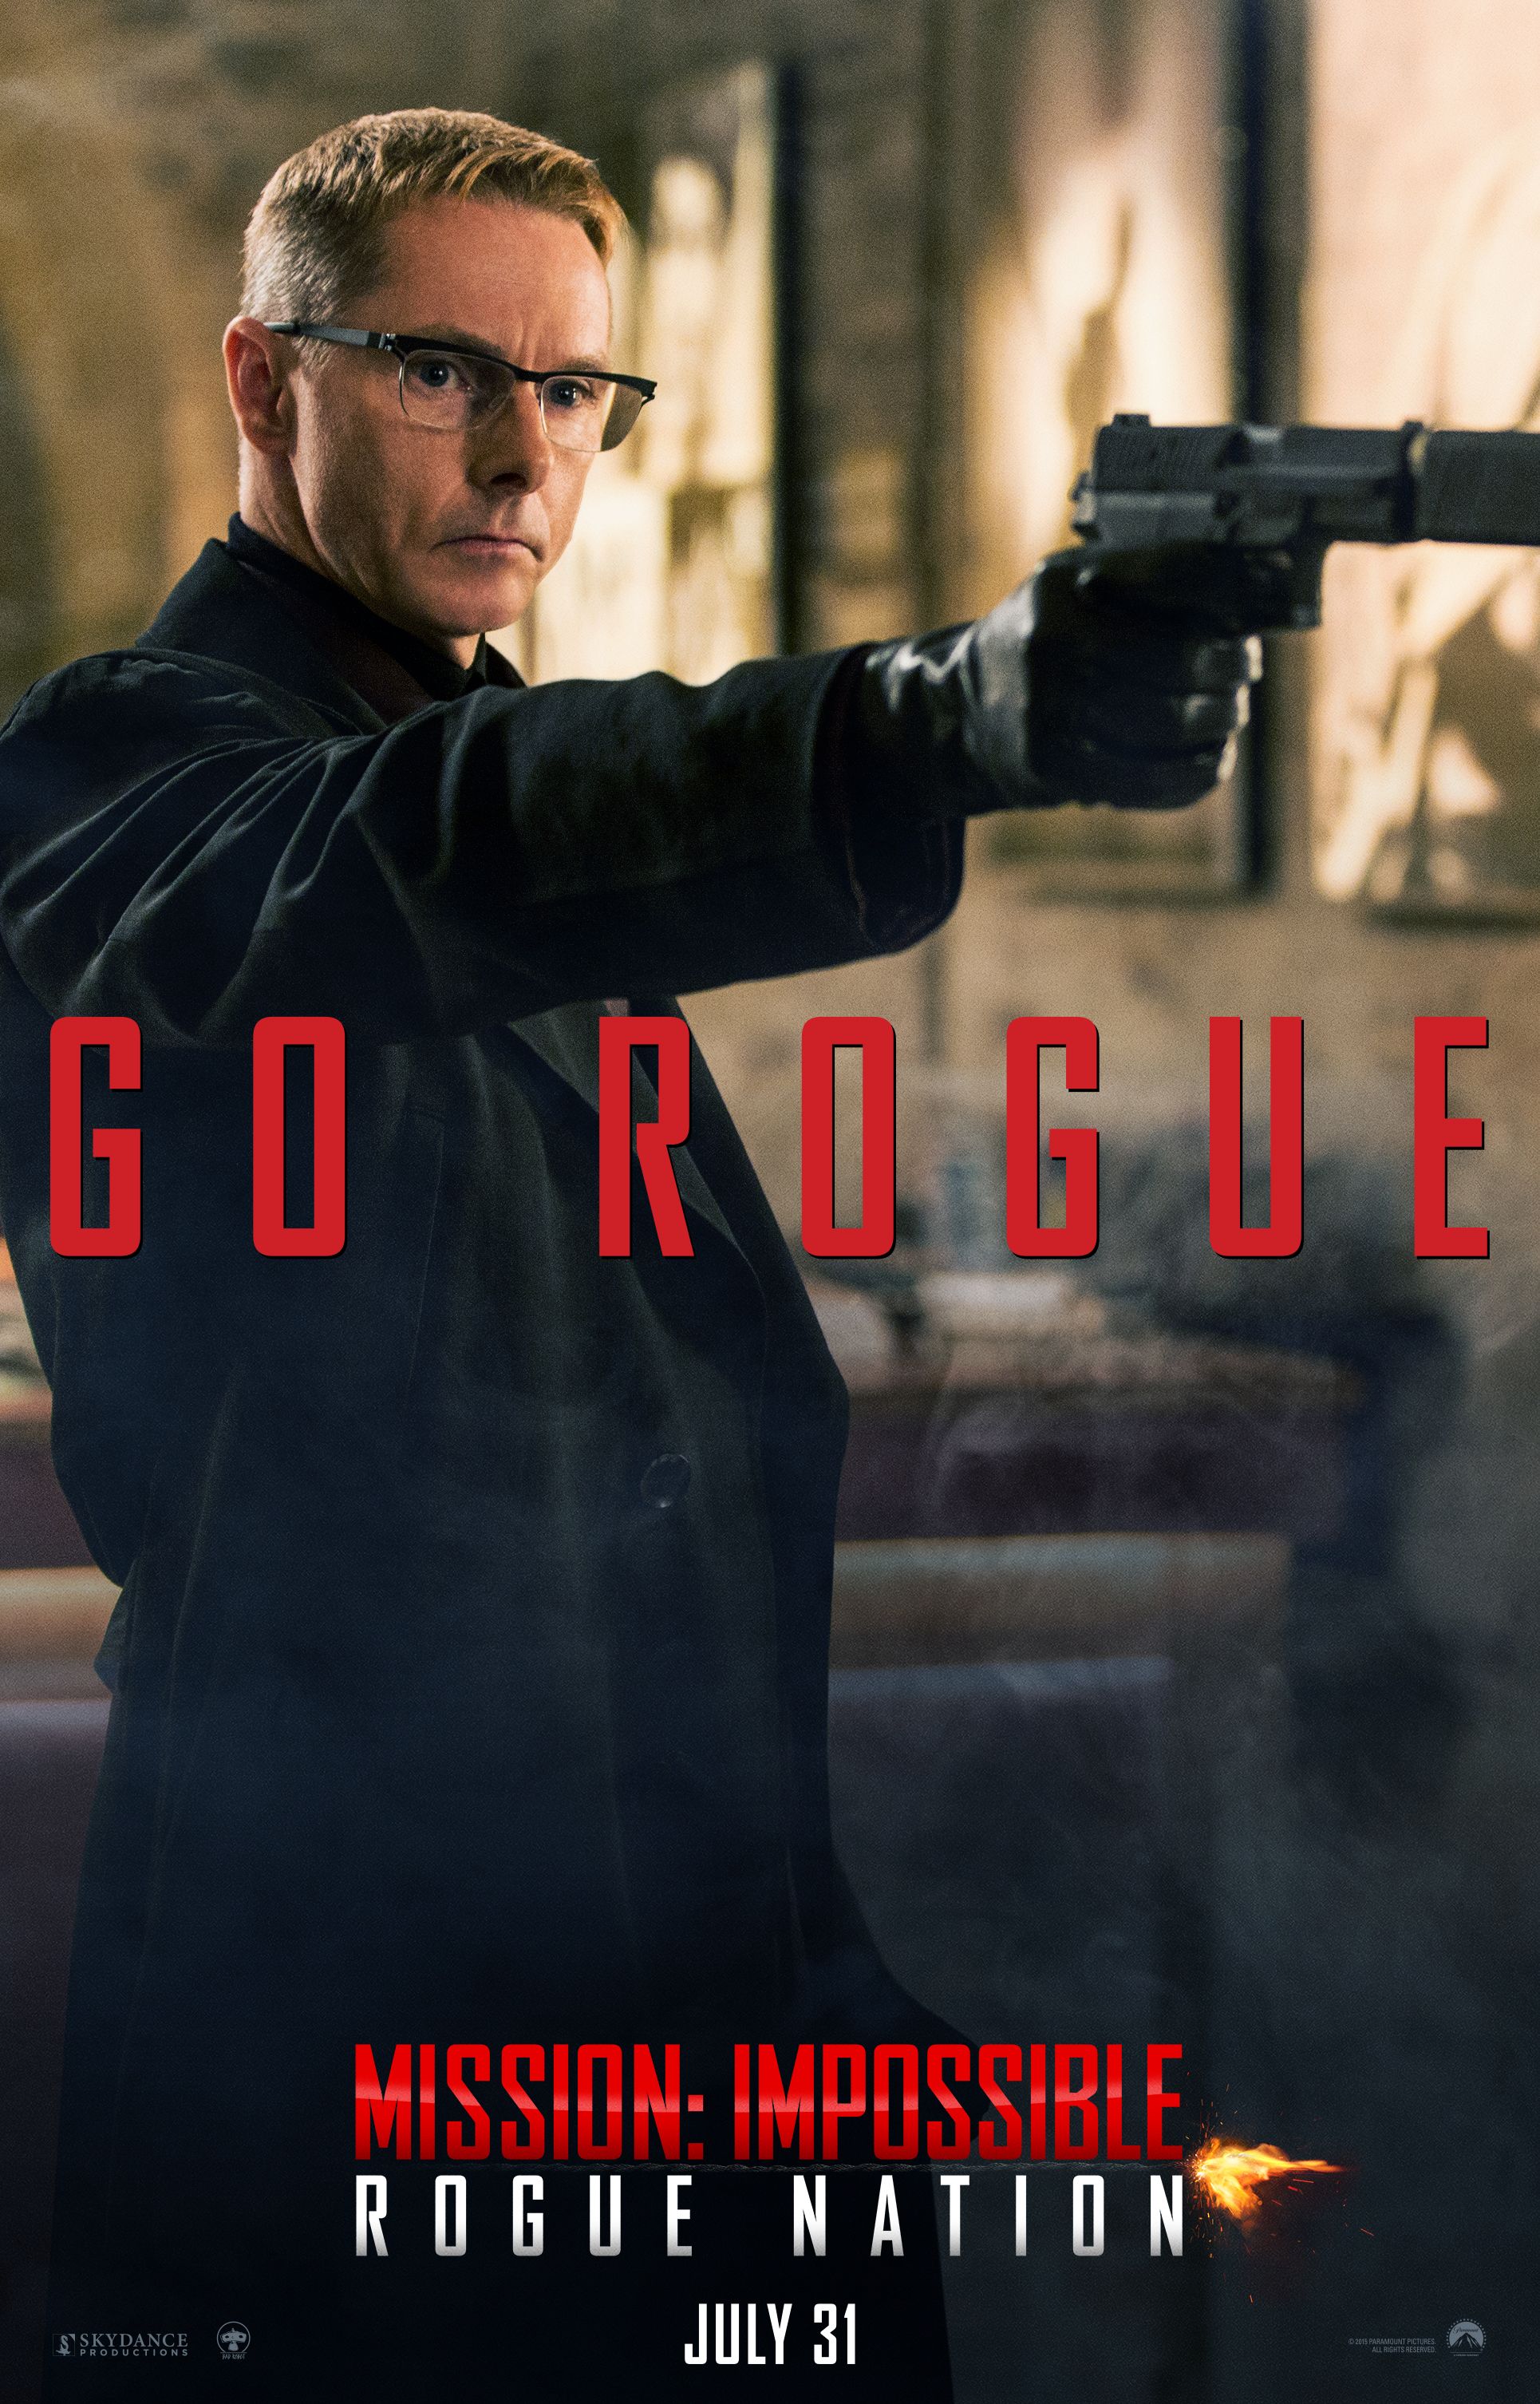 Mission: Impossible Rogue Nation Simon Pegg Poster